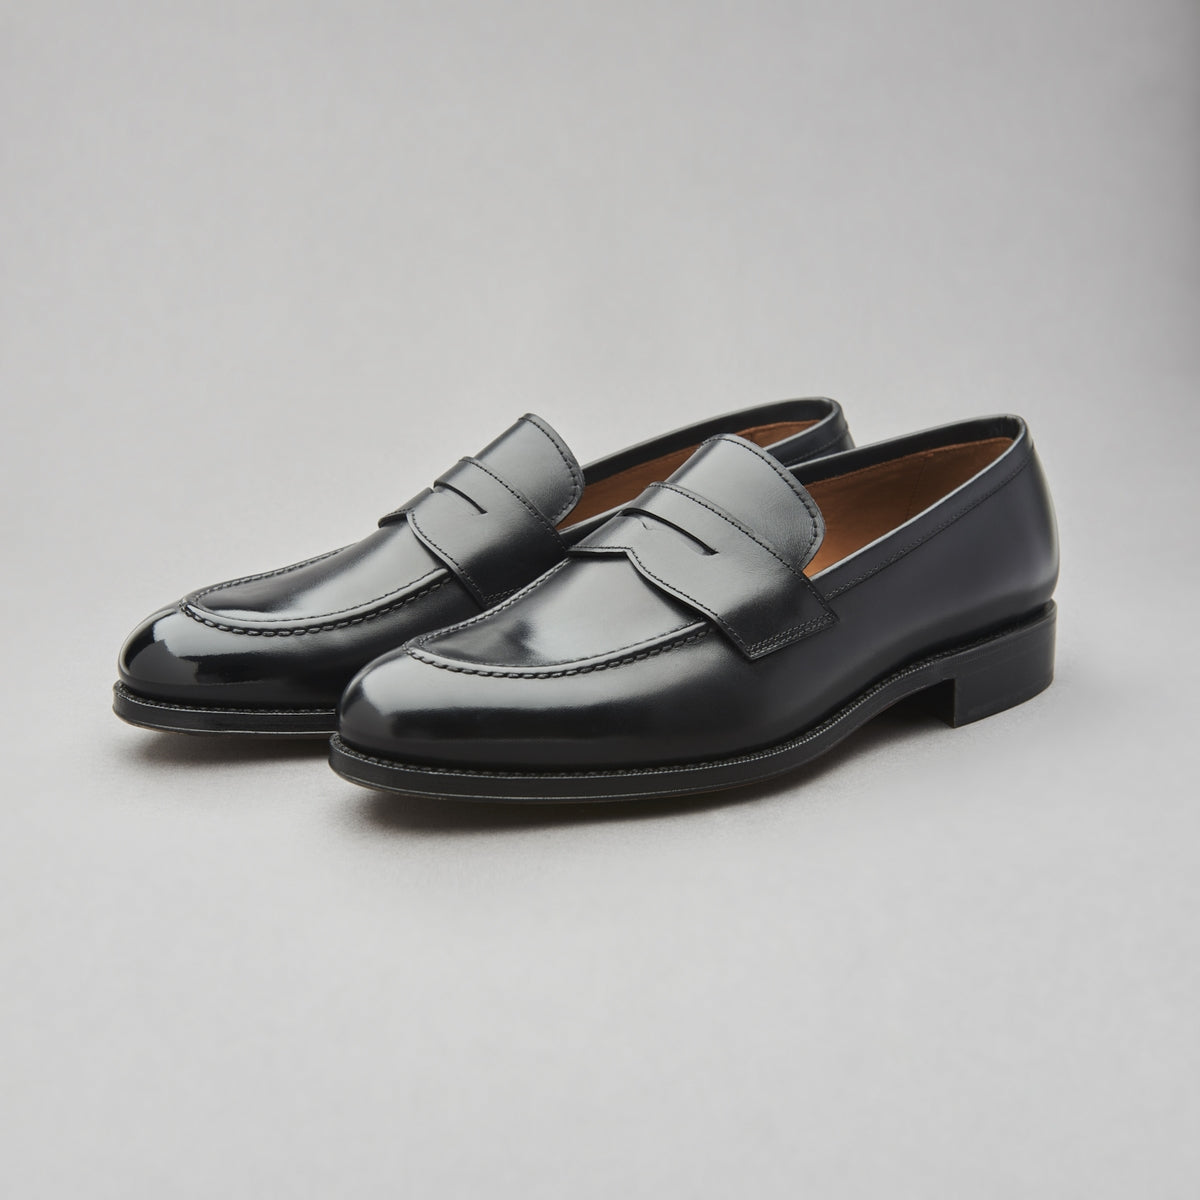 Men's Shoes - Yanko Penny Loafer